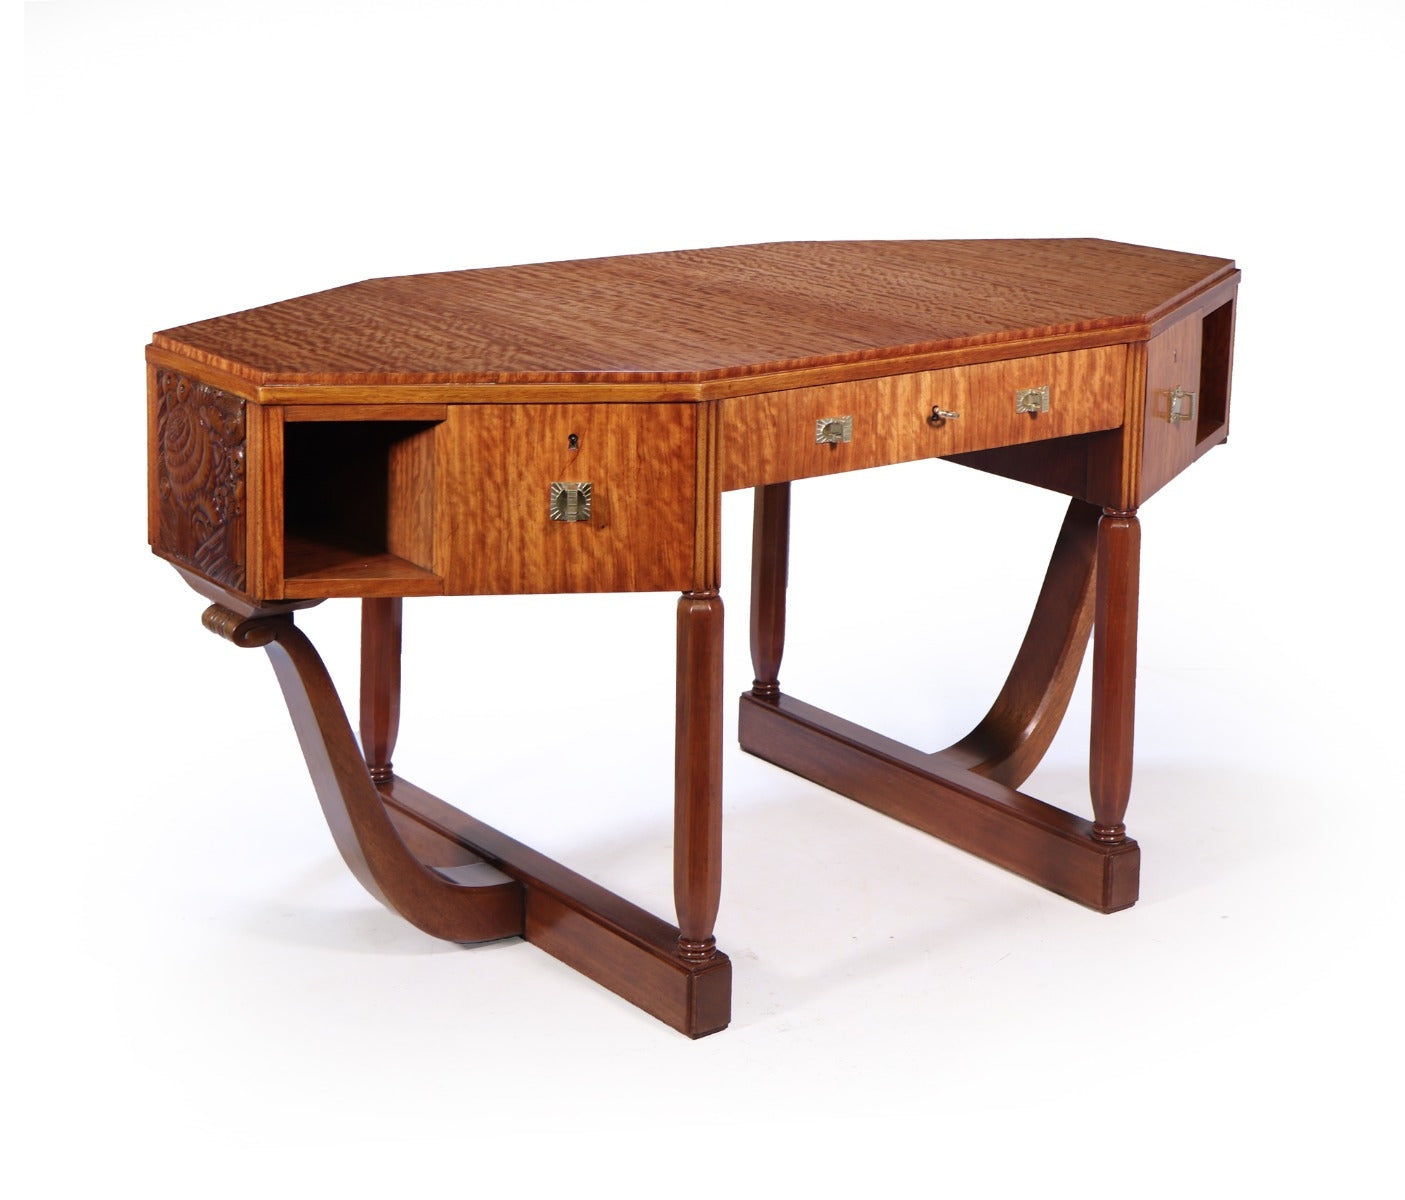 Art Deco Desk in Satinwood by Maurice Dufrene – The Furniture Rooms